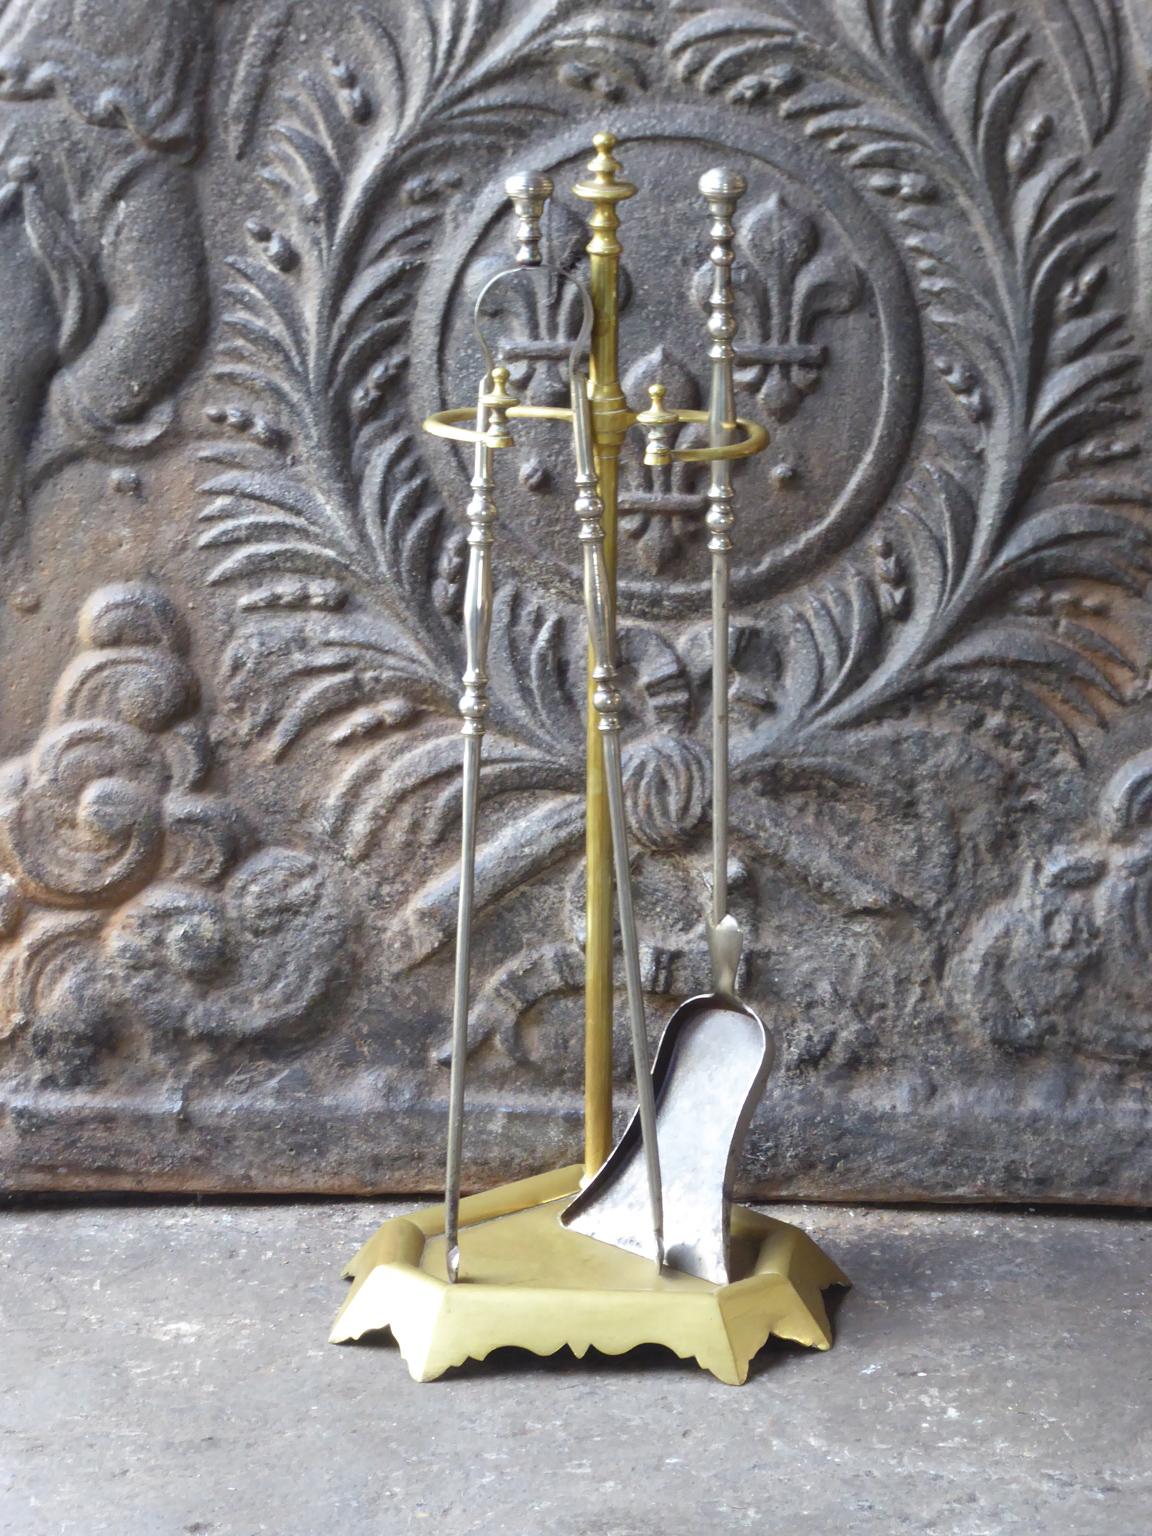 19th-century French Napoleon III fireplace tool set made of brass and wrought iron. The set is signed by 'Grandy Fils'. The tool set consists of a stand and two fireplace tools. The condition is good.







